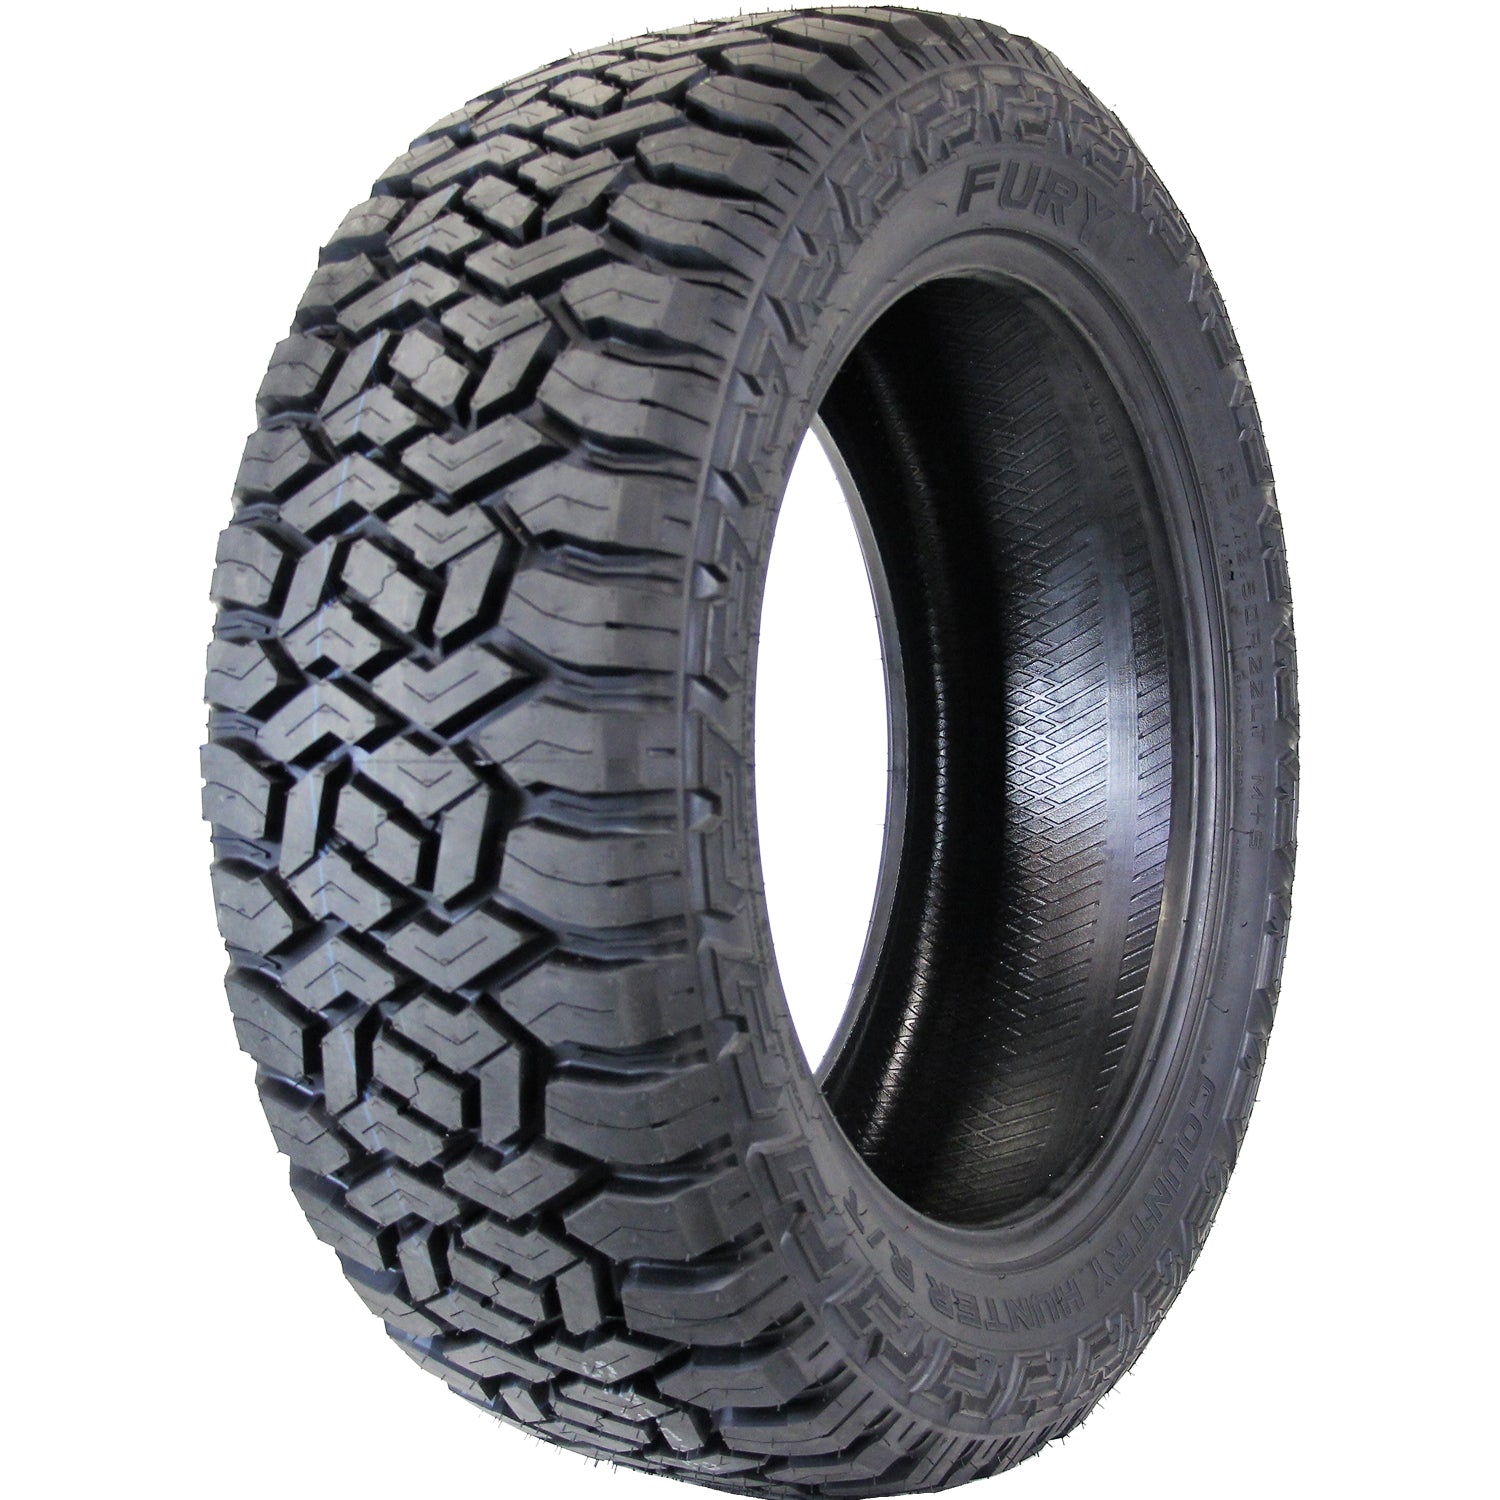 FURY OFFROAD COUNTRY HUNTER RT 37X12.50R20LT Tires